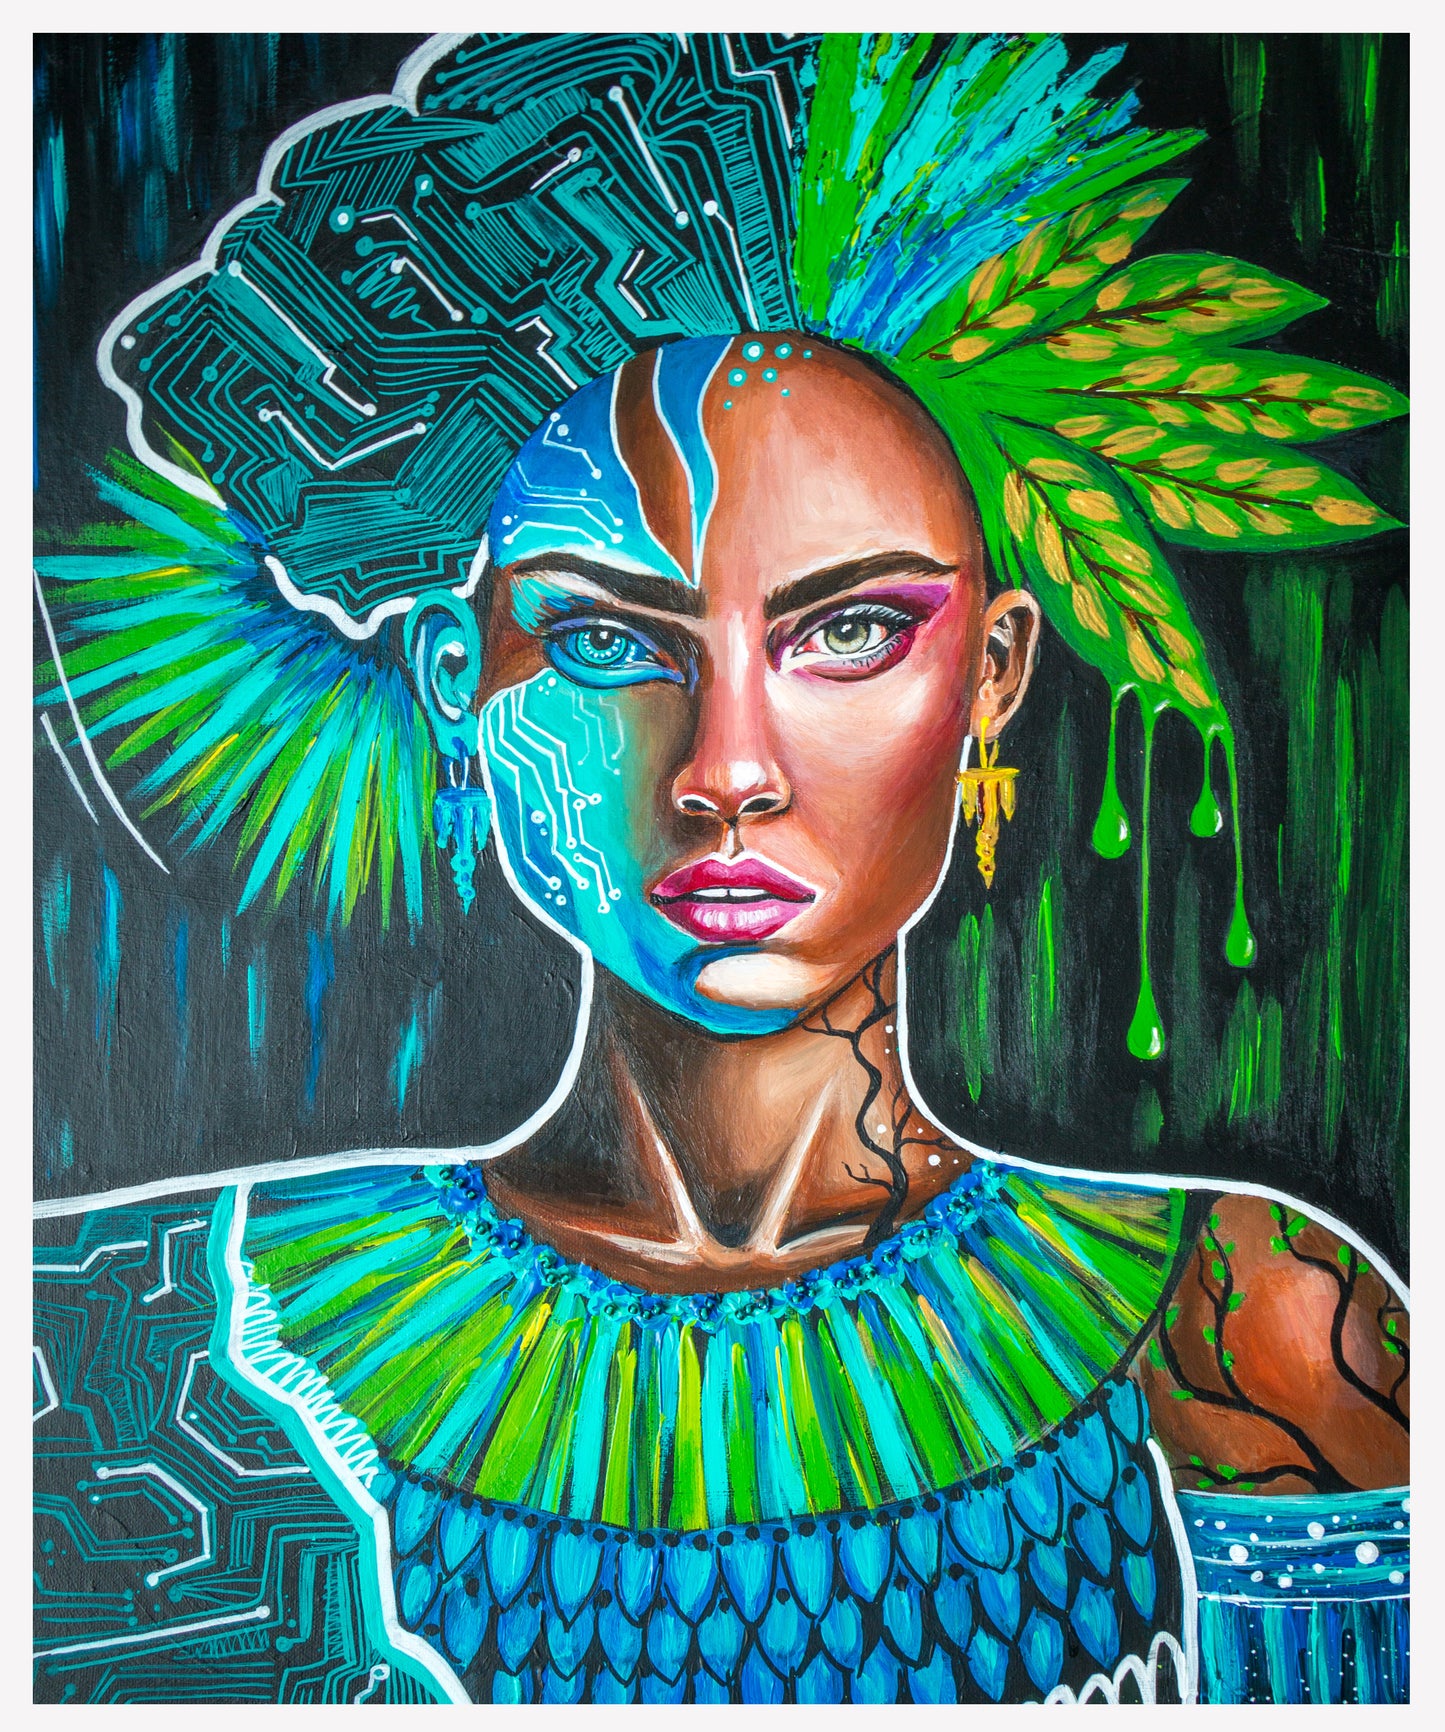 AI Woman Artwork Painted with Acrylics Synthesis of Natural and Artificial Intelligence Art